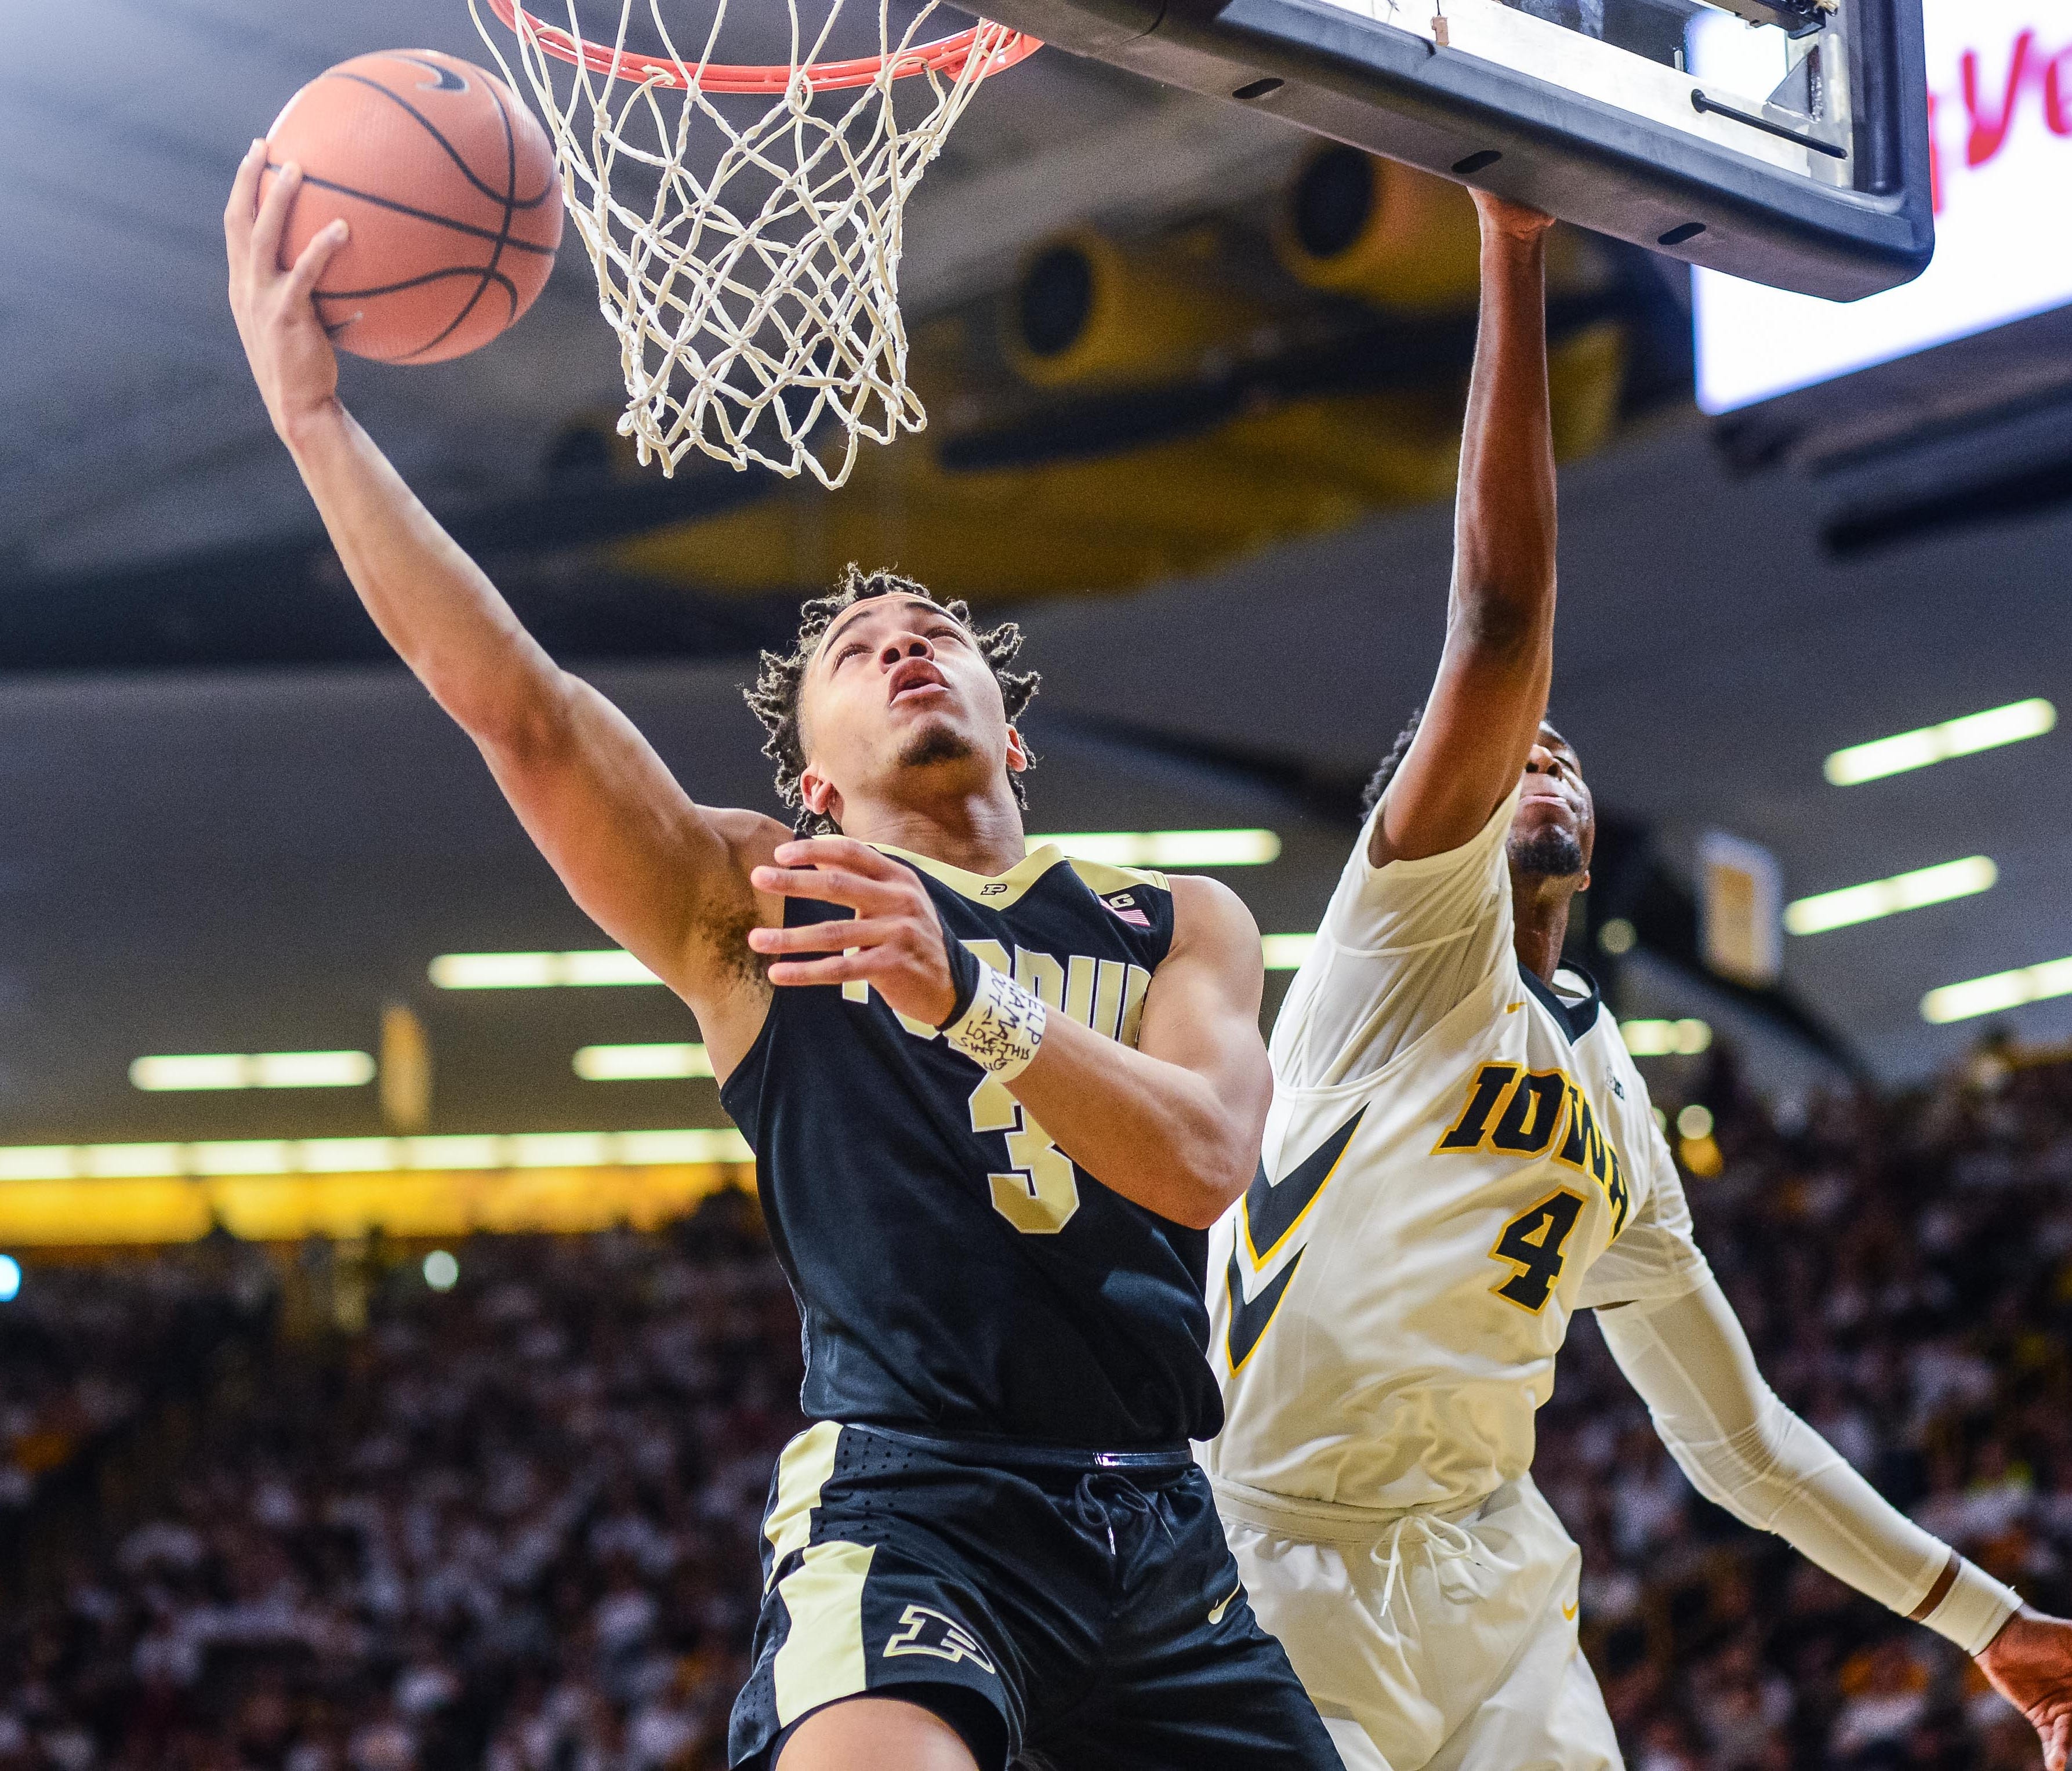 Purdue Boilermakers guard Carsen Edwards (3) goes to the basket as Iowa Hawkeyes guard Isaiah Moss (4) defends during the first half at Carver-Hawkeye Arena.